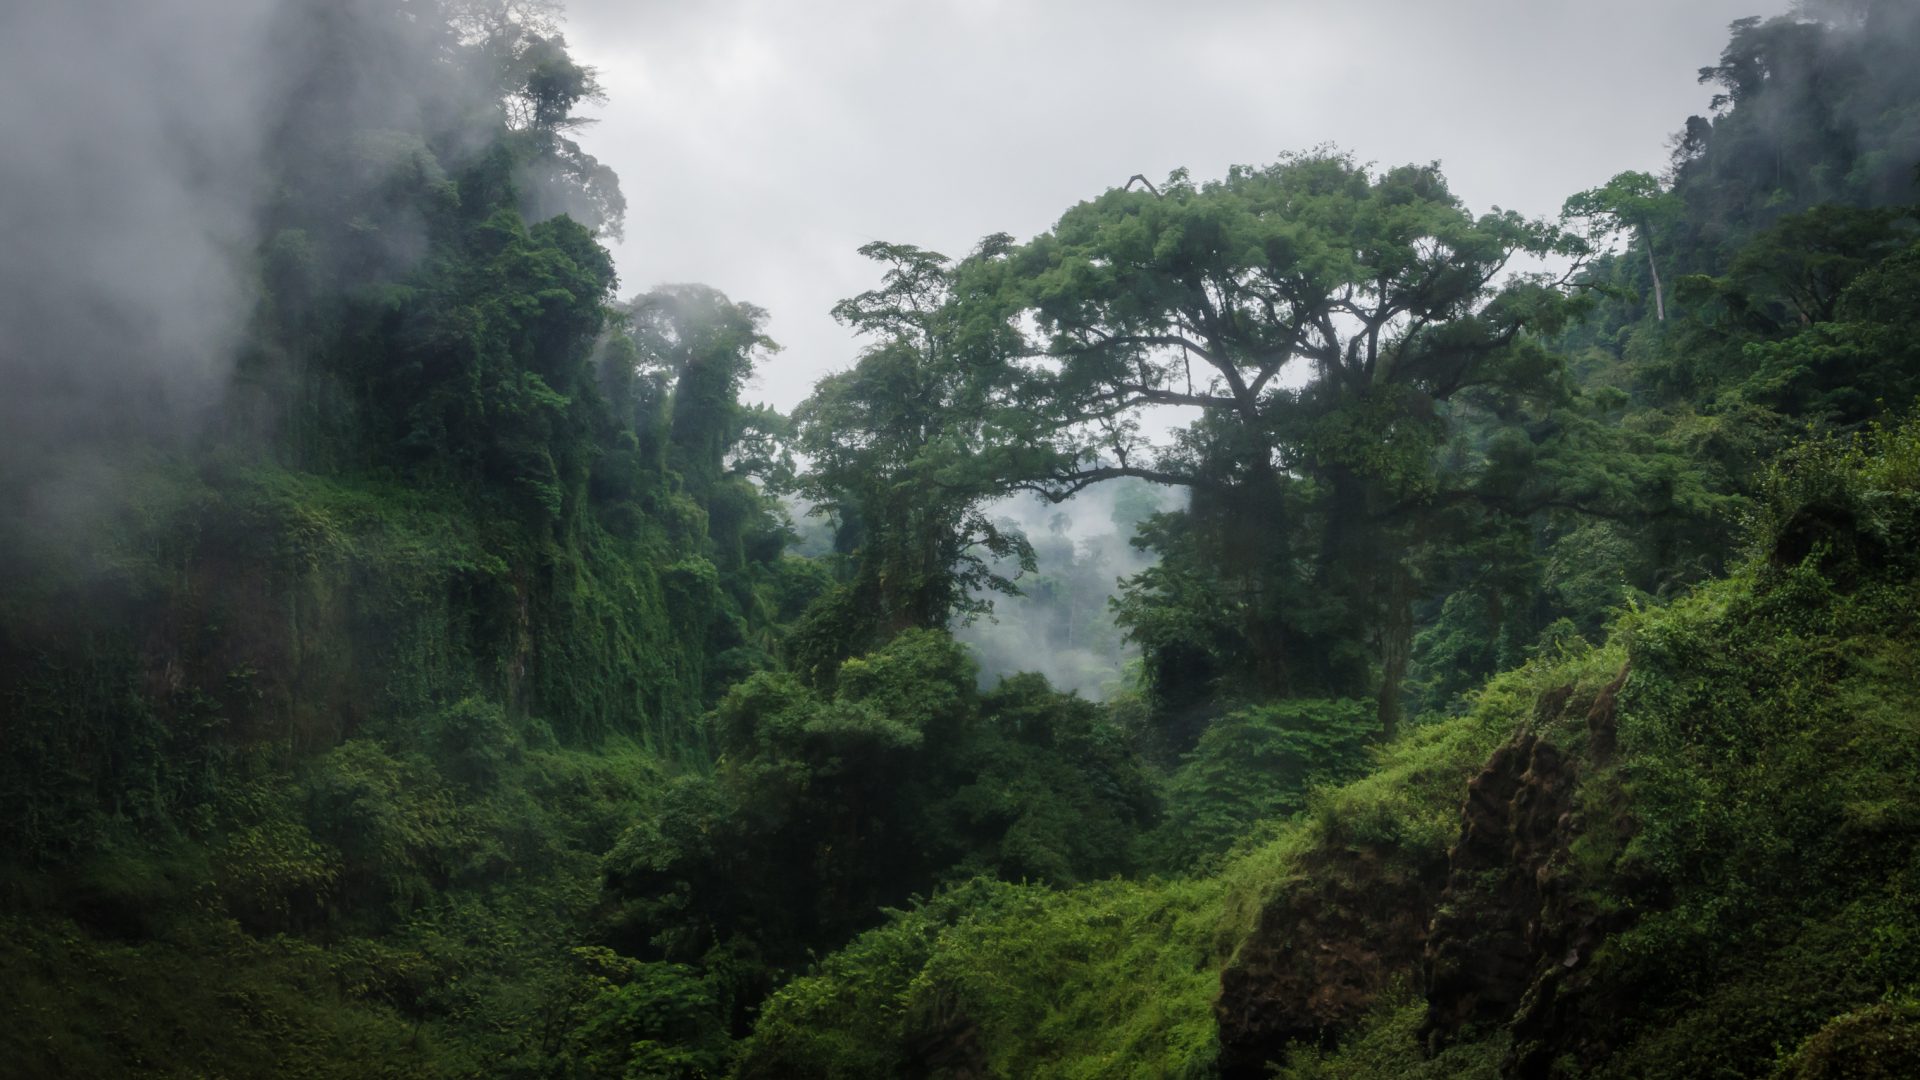 Foggy overgrown hills in rainforest of Cameroon, Africa.